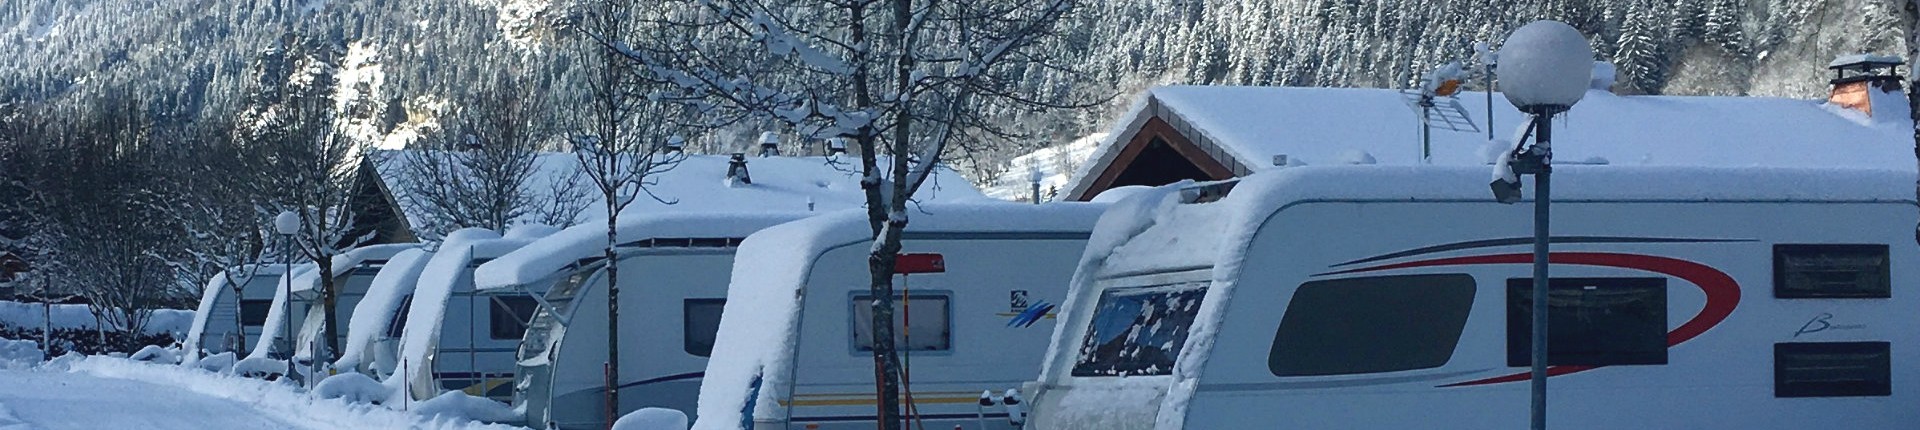 camping-l-oustalet-chatel-hiver-1-134